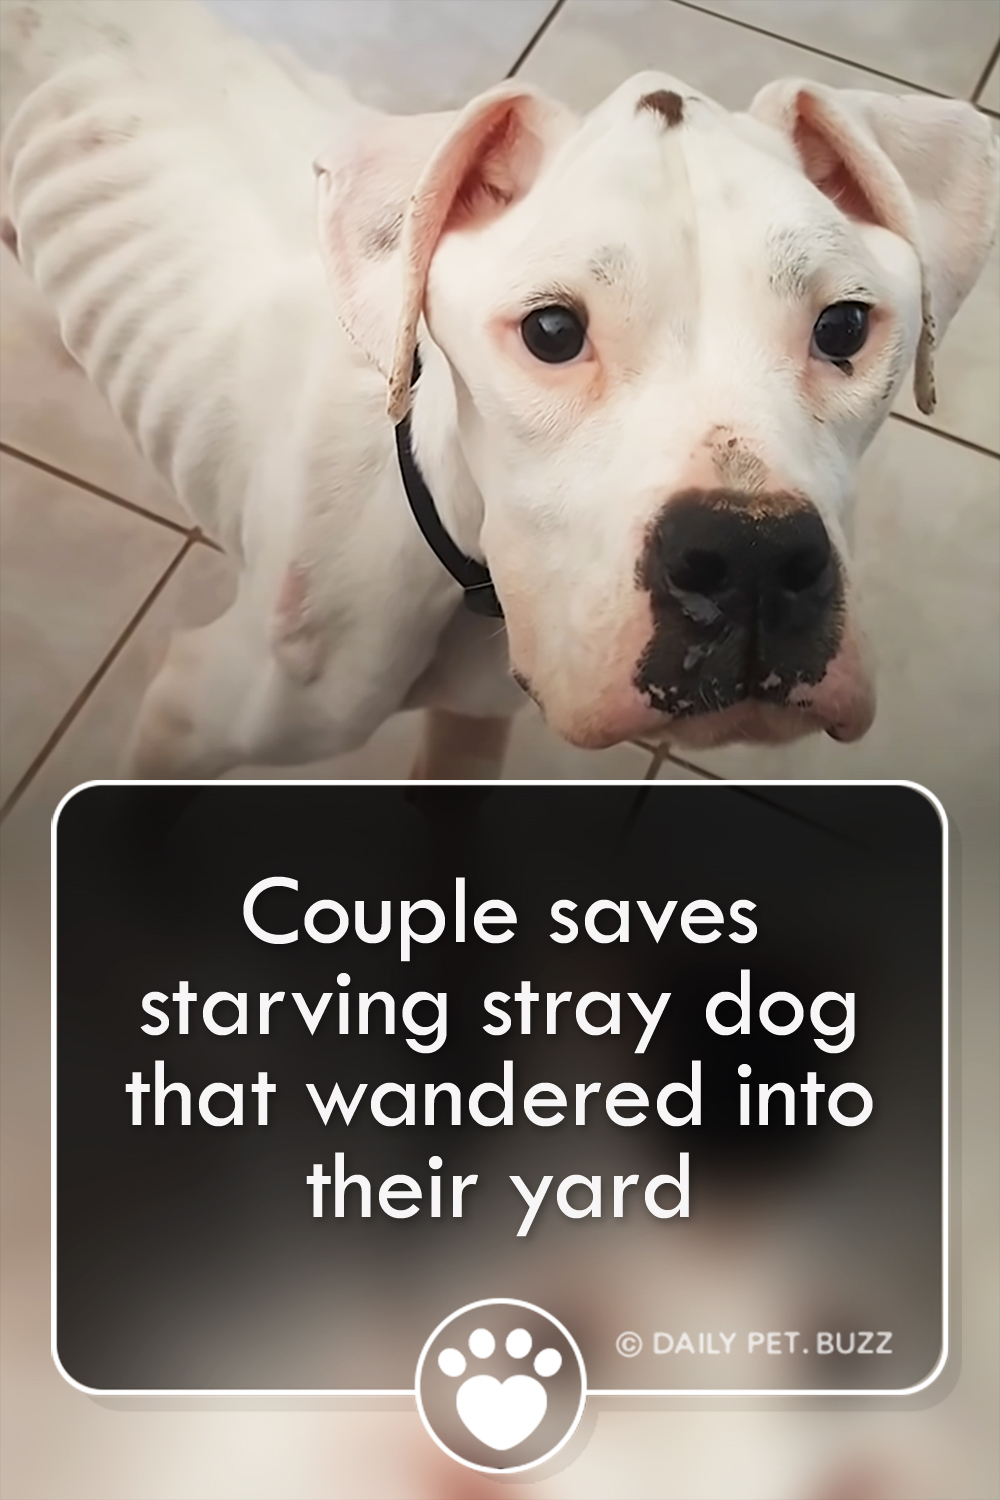 Couple saves starving stray dog that wandered into their yard